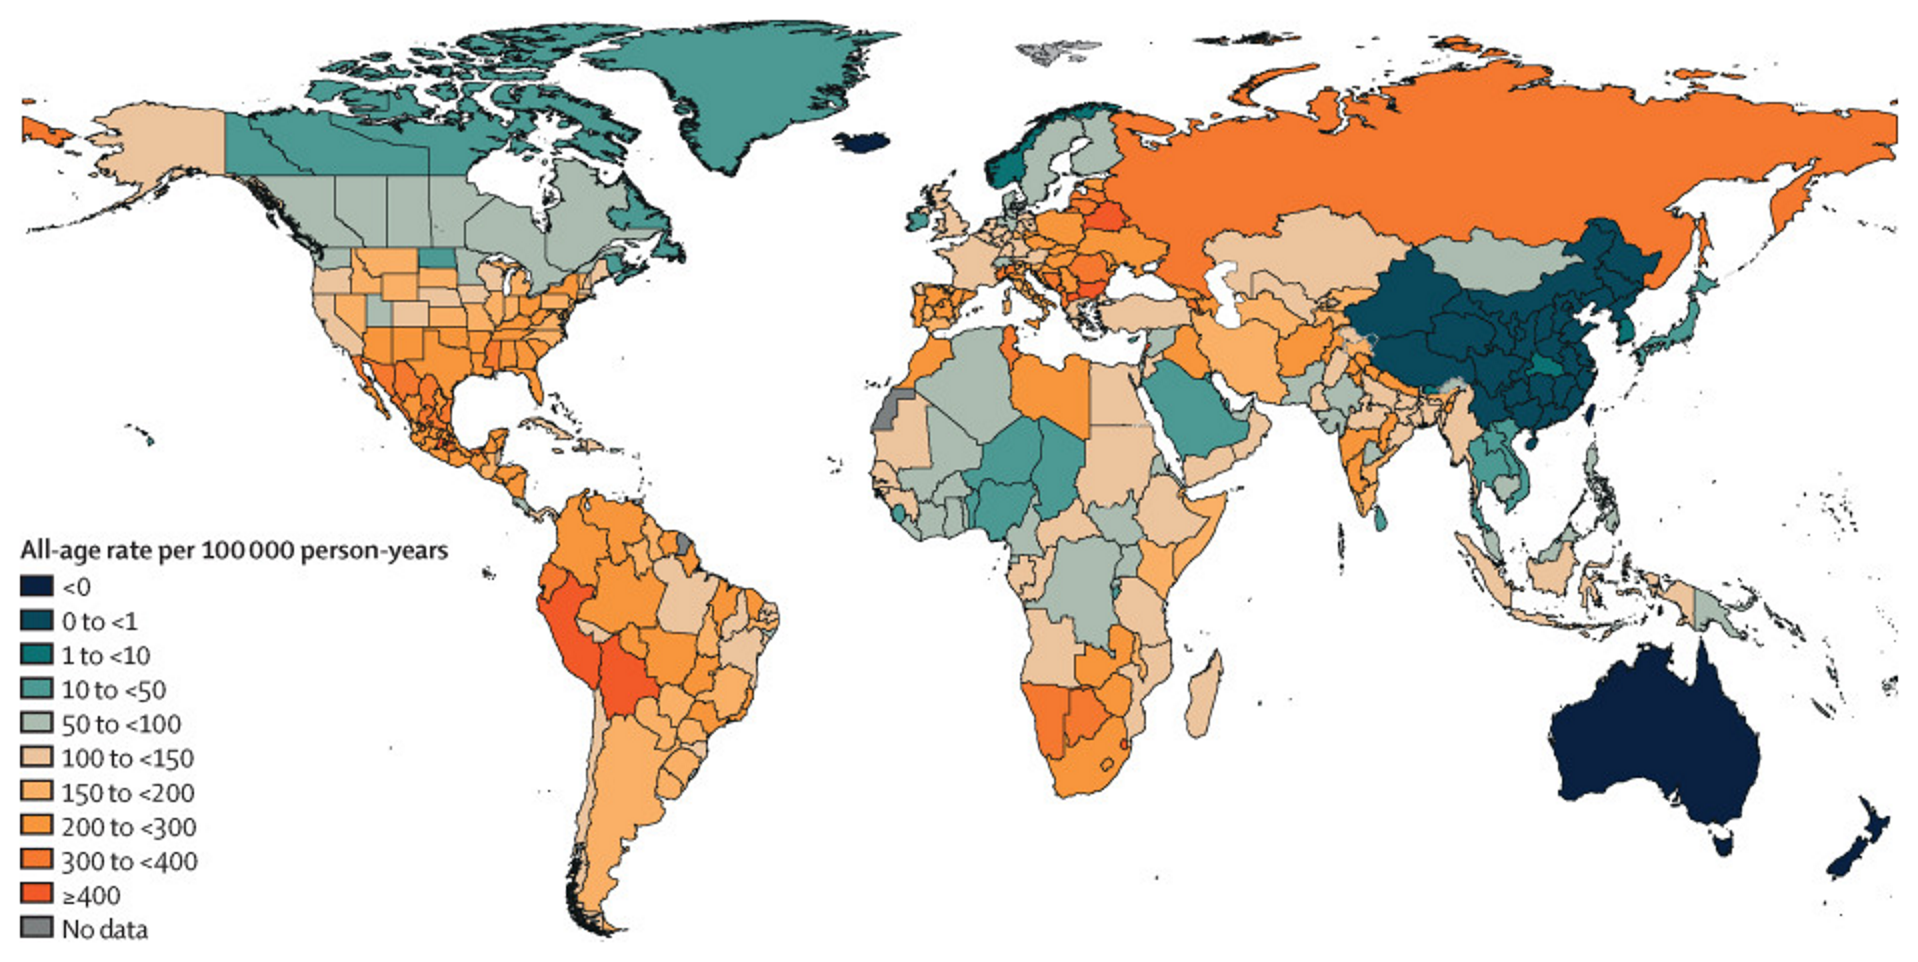 Global distribution of estimated excess mortality rate due to the COVID-19 pandemic, for the cumulative period 2020–21. Although reported COVID-19 deaths between 1 January 2020 and 31 December 2021 totaled 5.94 million worldwide, IHME estimates that 18.2 million (95 percent uncertainty interval 17.1–19.6) people died worldwide because of the COVID-19 pandemic over that period, as measured by excess mortality. Graphic: Wang, et al., 2022 / The Lancet